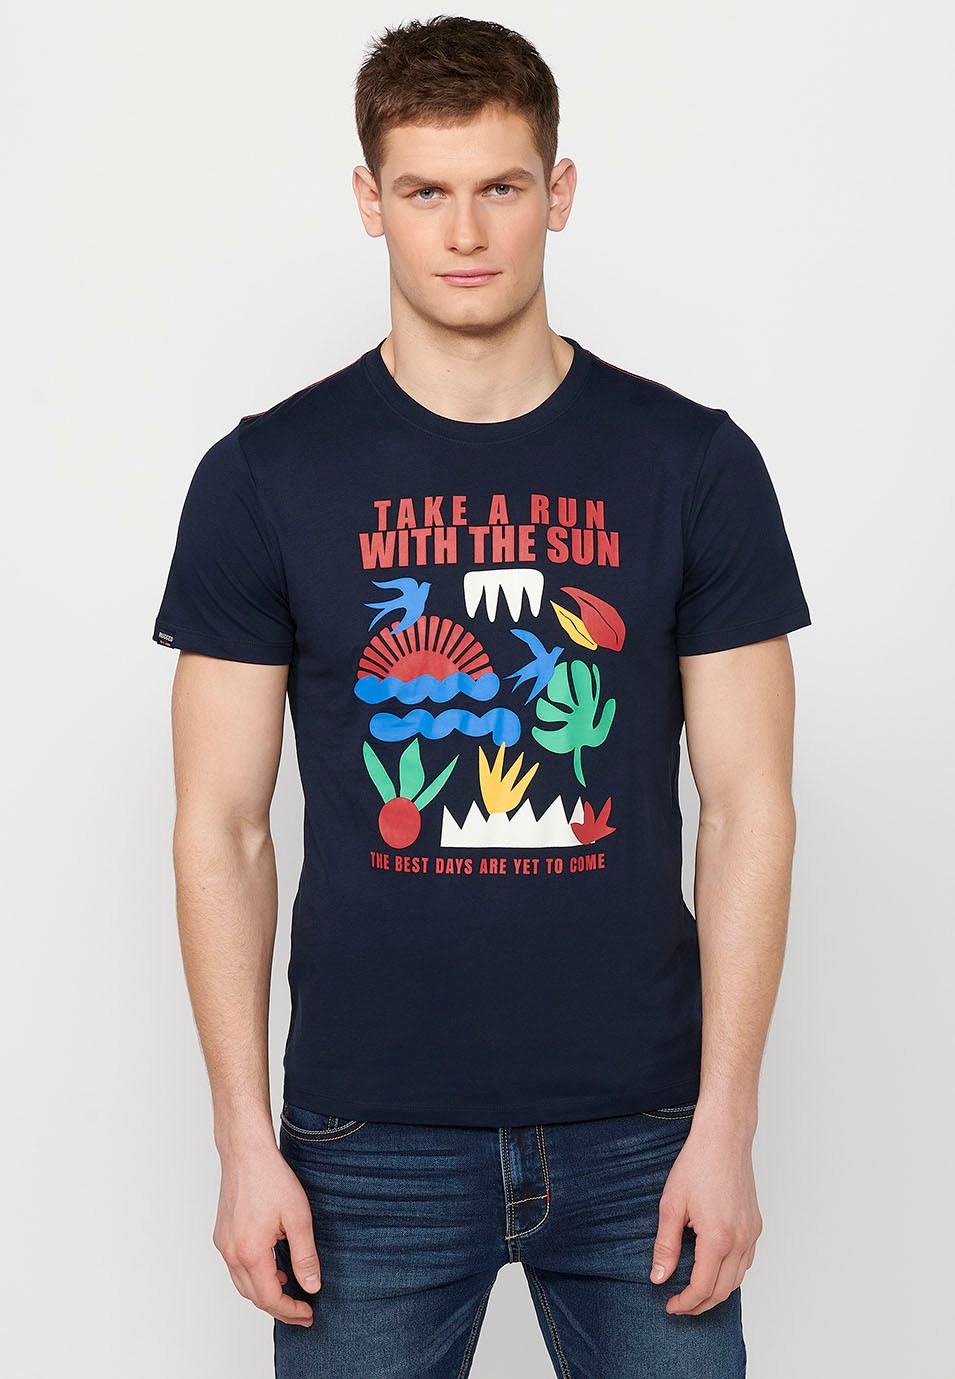 Printed short-sleeved T-shirt, round neck in navy color for men